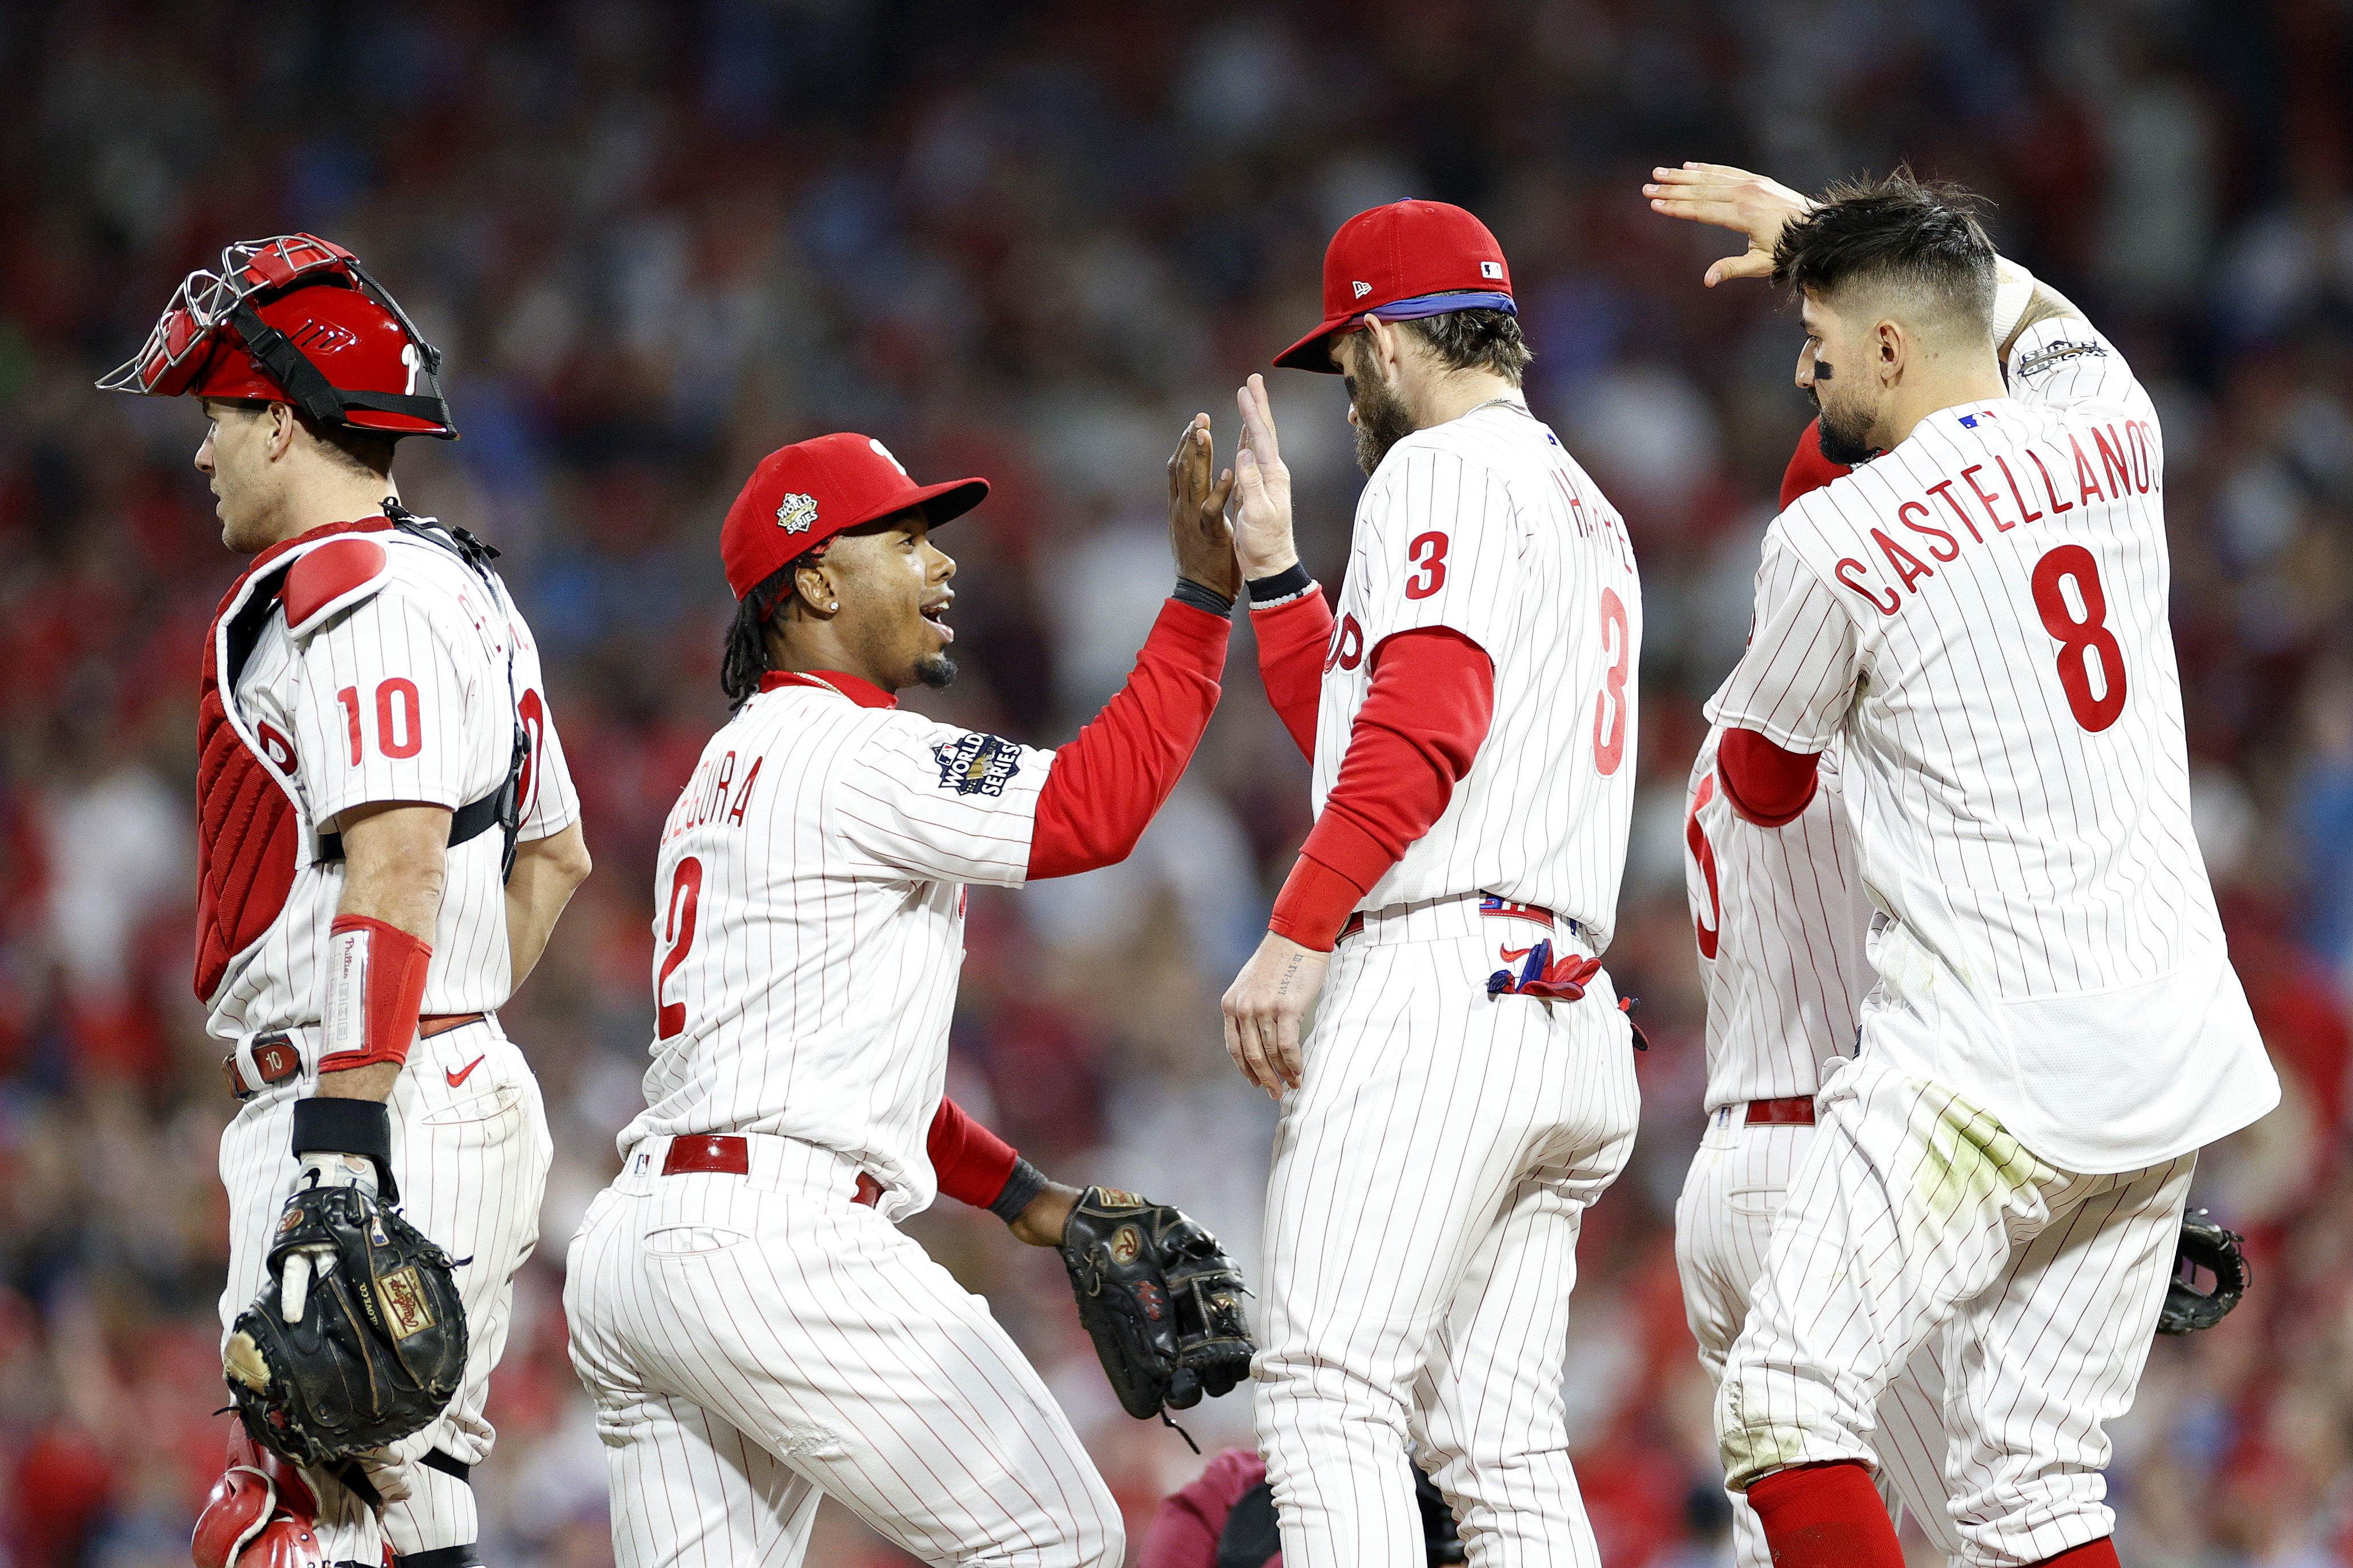 The Ultimate Guide to the 2022 Phillies World Series